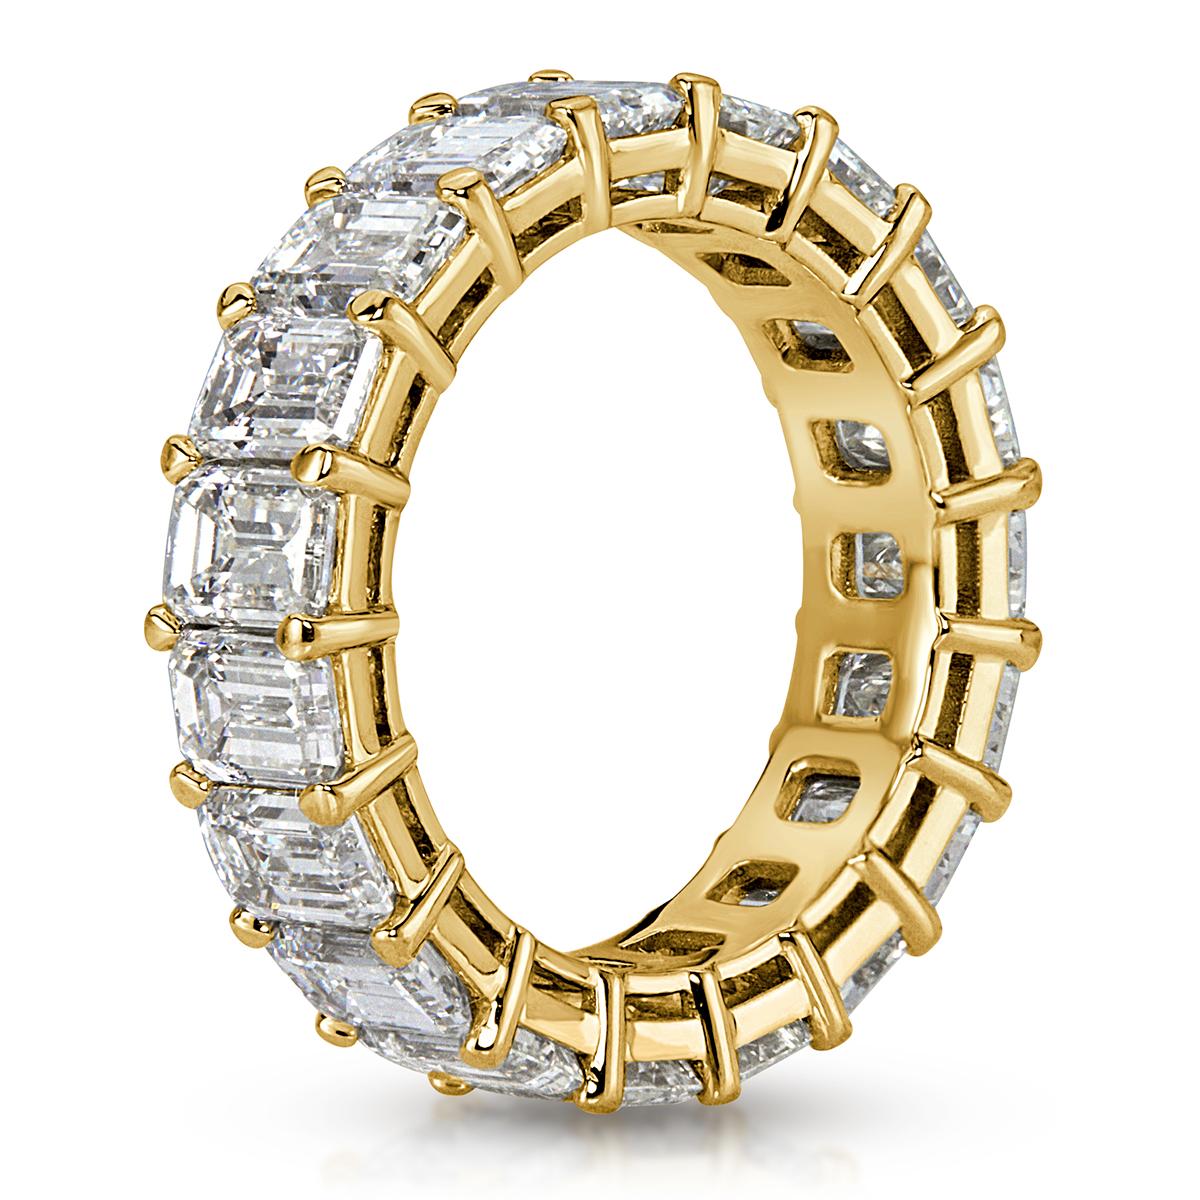 Handcrafted in 18k yellow gold, this stunning diamond eternity band showcases 7.78ct of impeccably matched emerald cut diamonds graded at E-F in color, VVS2-VS1 in clarity. All eternity bands are shown in a size 6.5. We custom craft each eternity